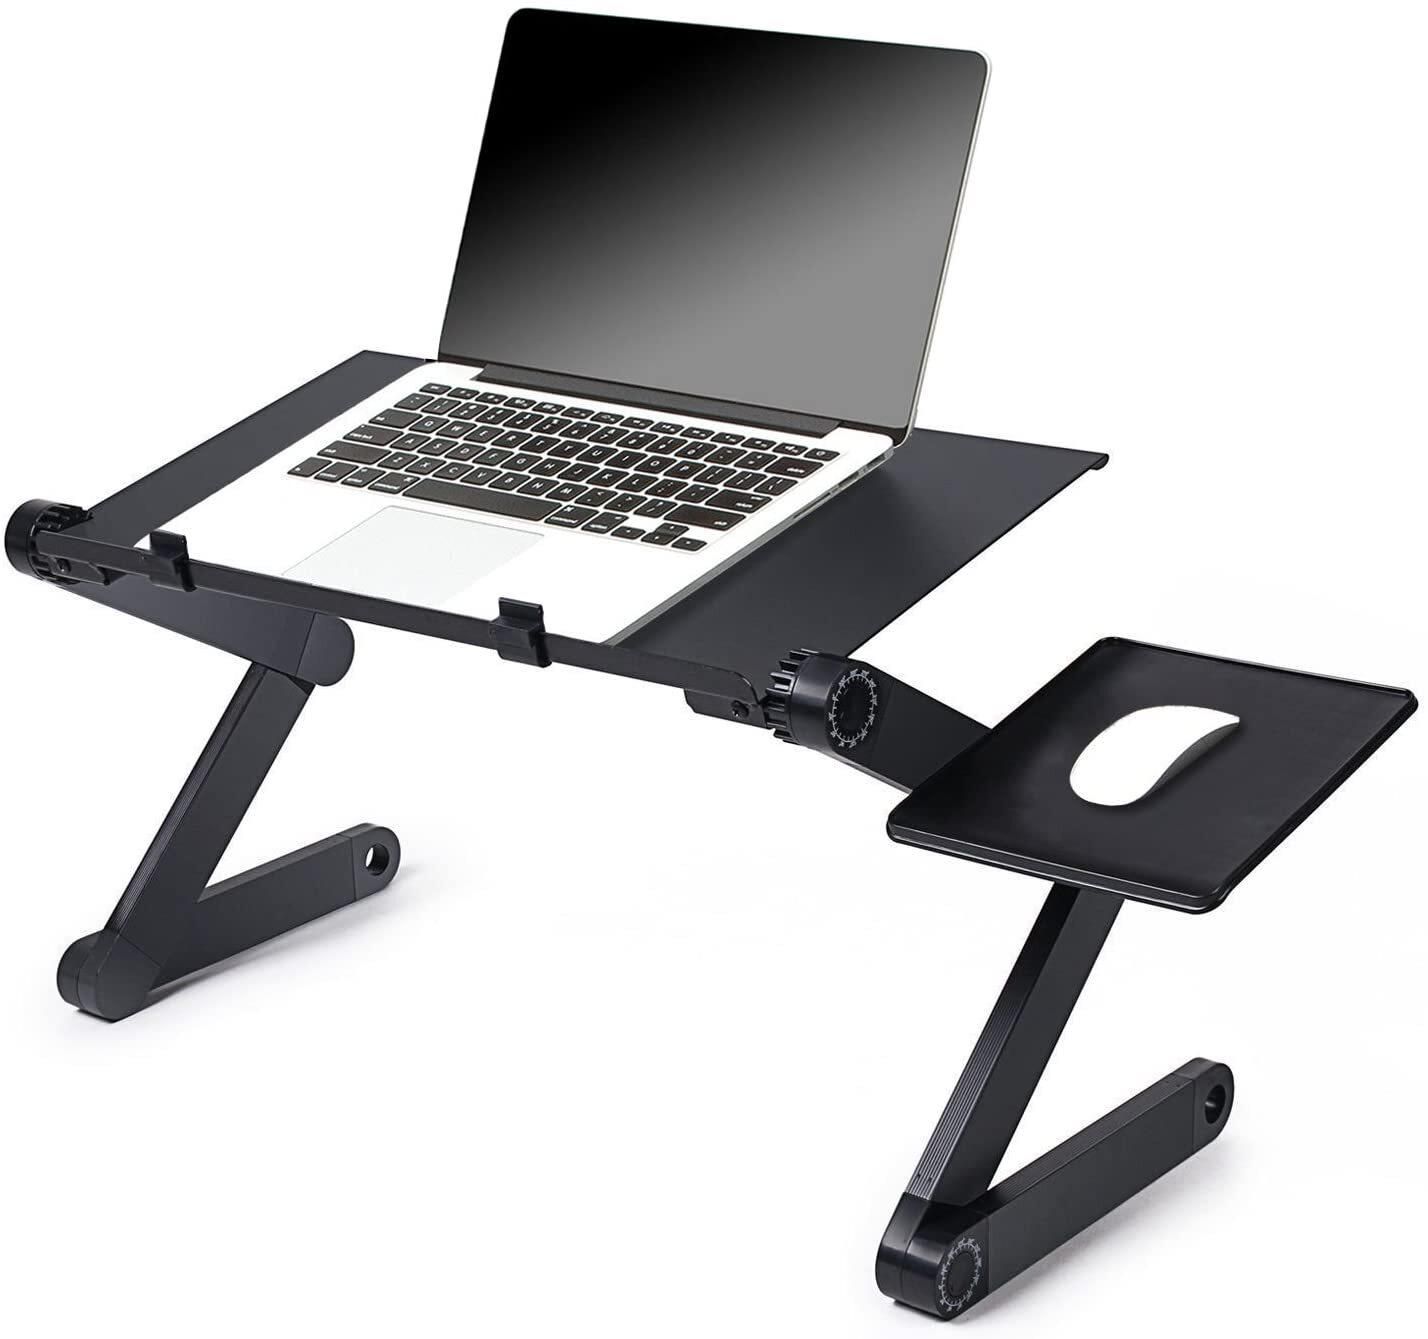 Generic Laptop Desk, Laptop Stand For Bed And Sofa, Portable Adjustable Laptop Table Desk Stand With Mouse Pad, Ergonomic Design Lap TV Bed Tray Aluminum Cozy Desk Suitable For Reading Studying